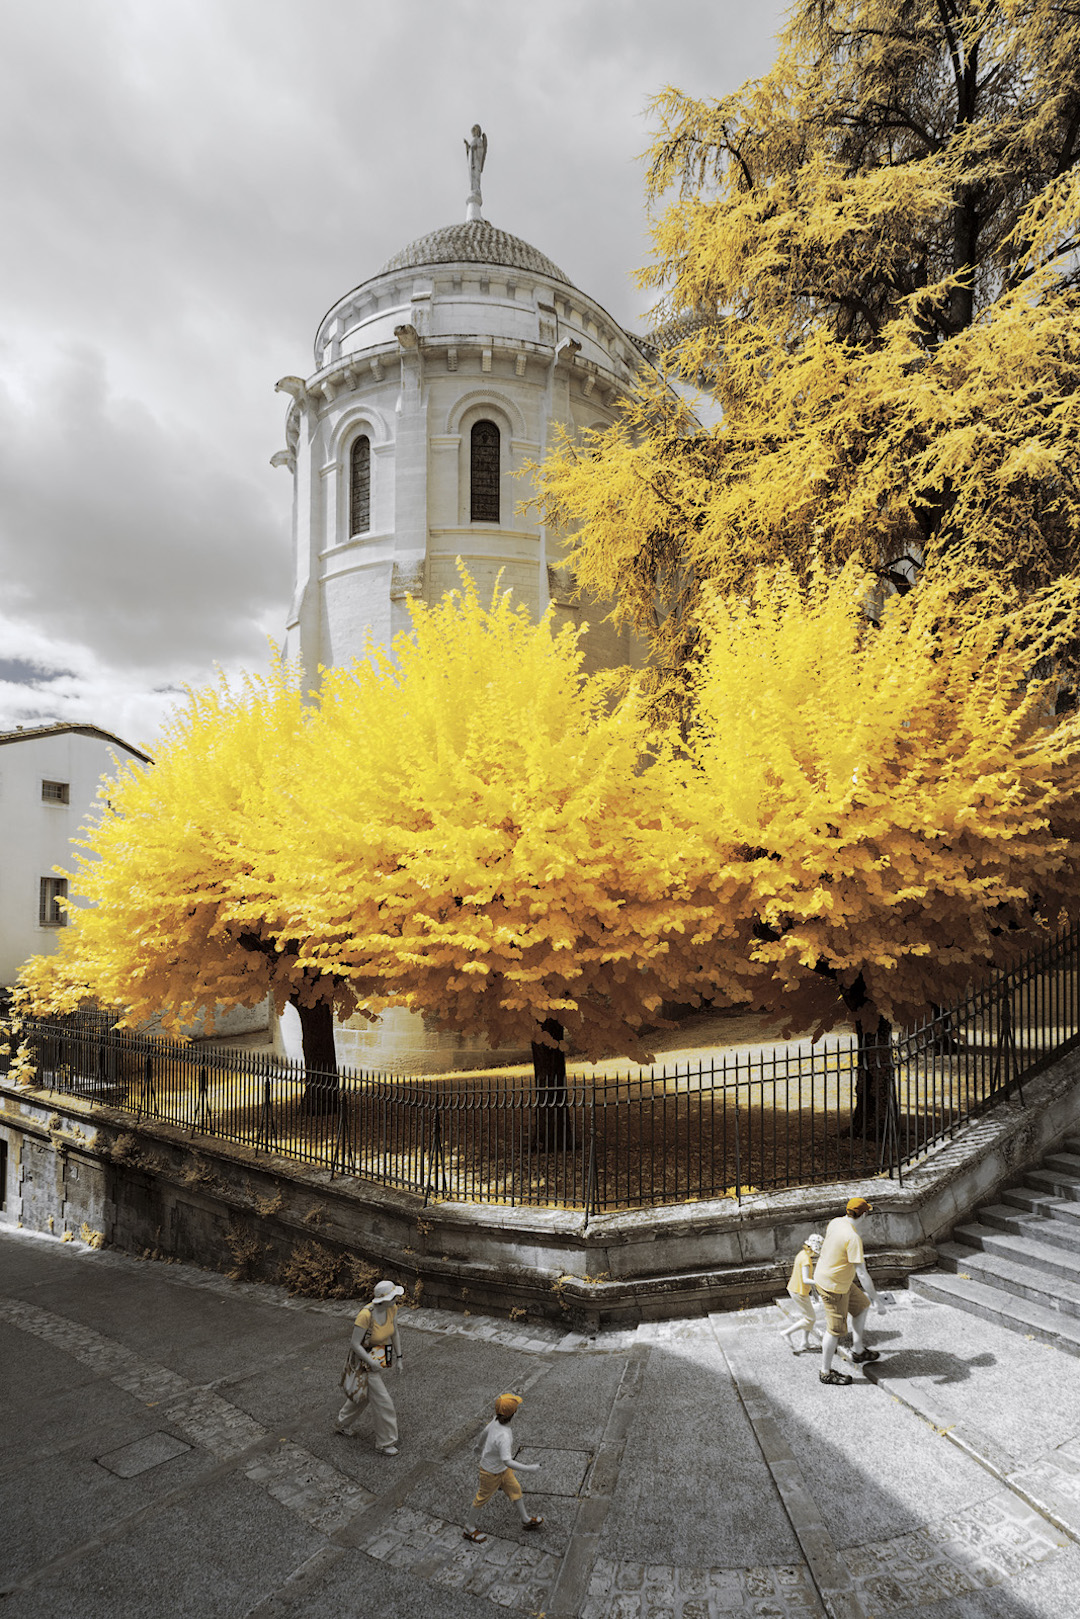 Digital Infrared Photography Photos of France